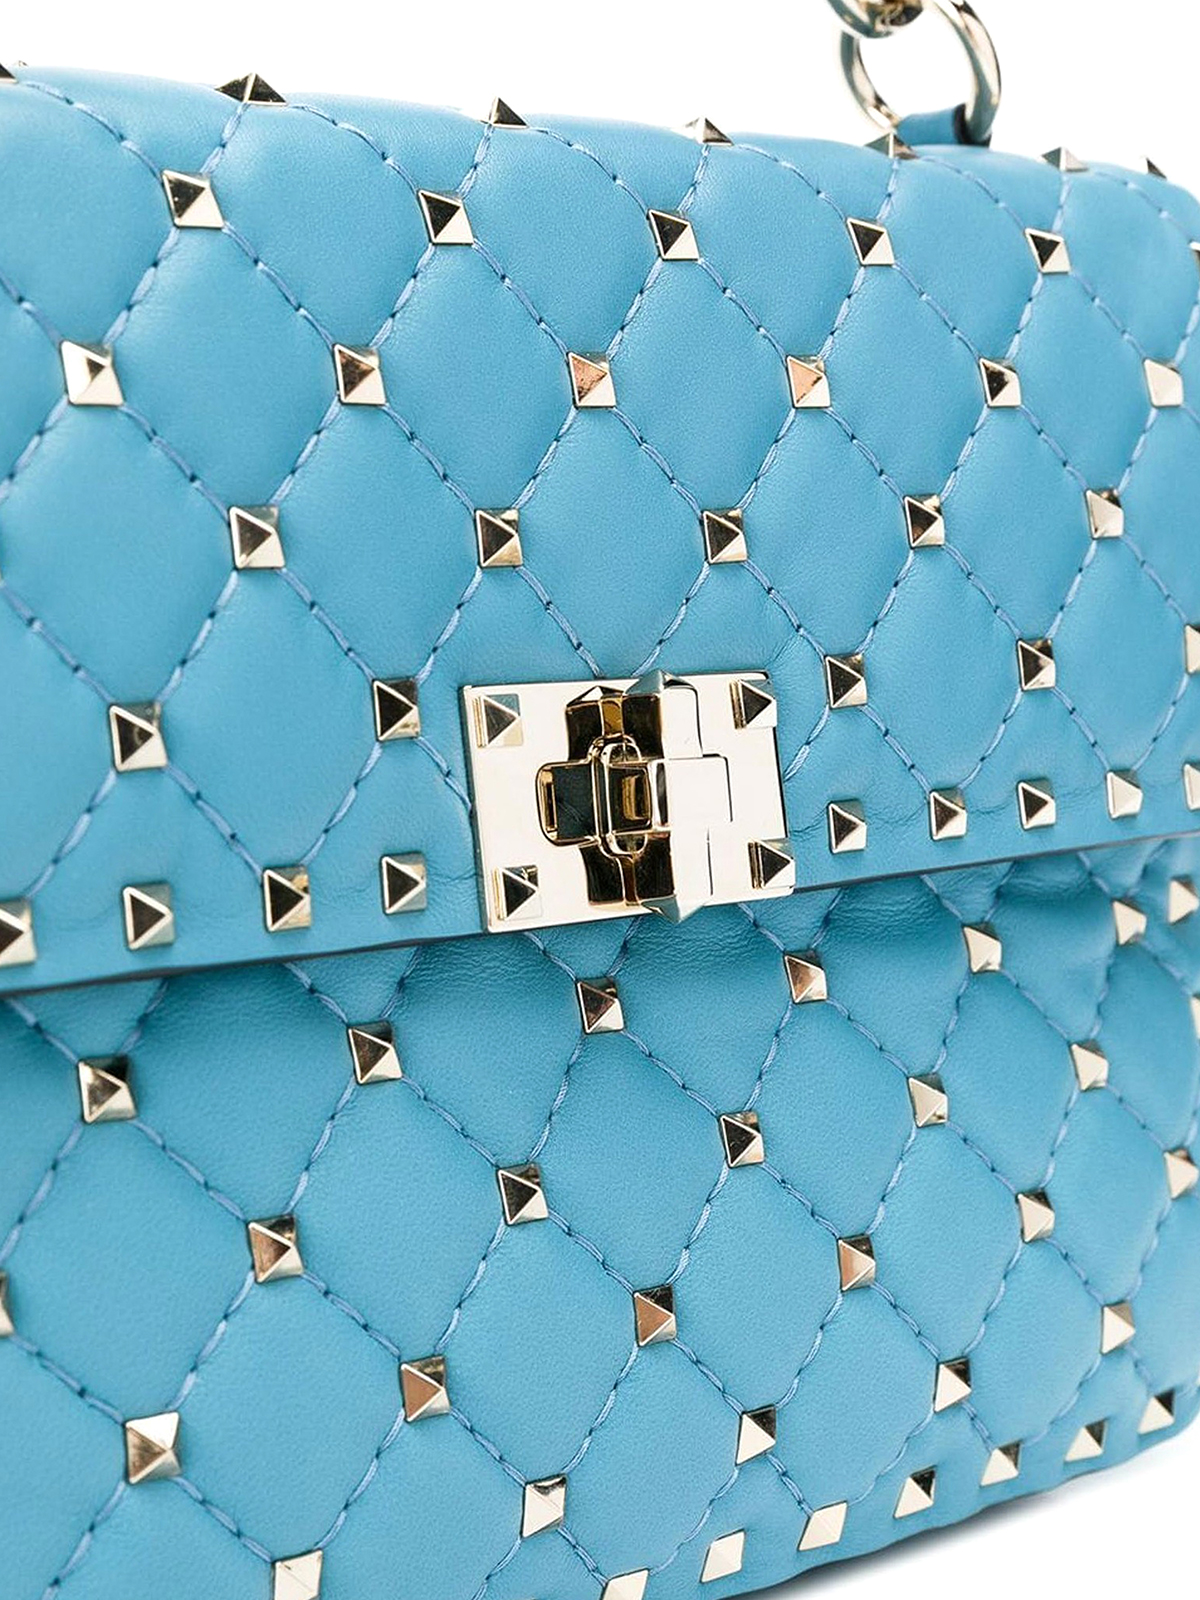 Valentino Garavani Light Blue Valentino Rockstud Spike Mini Backpack In  Quilted Leather